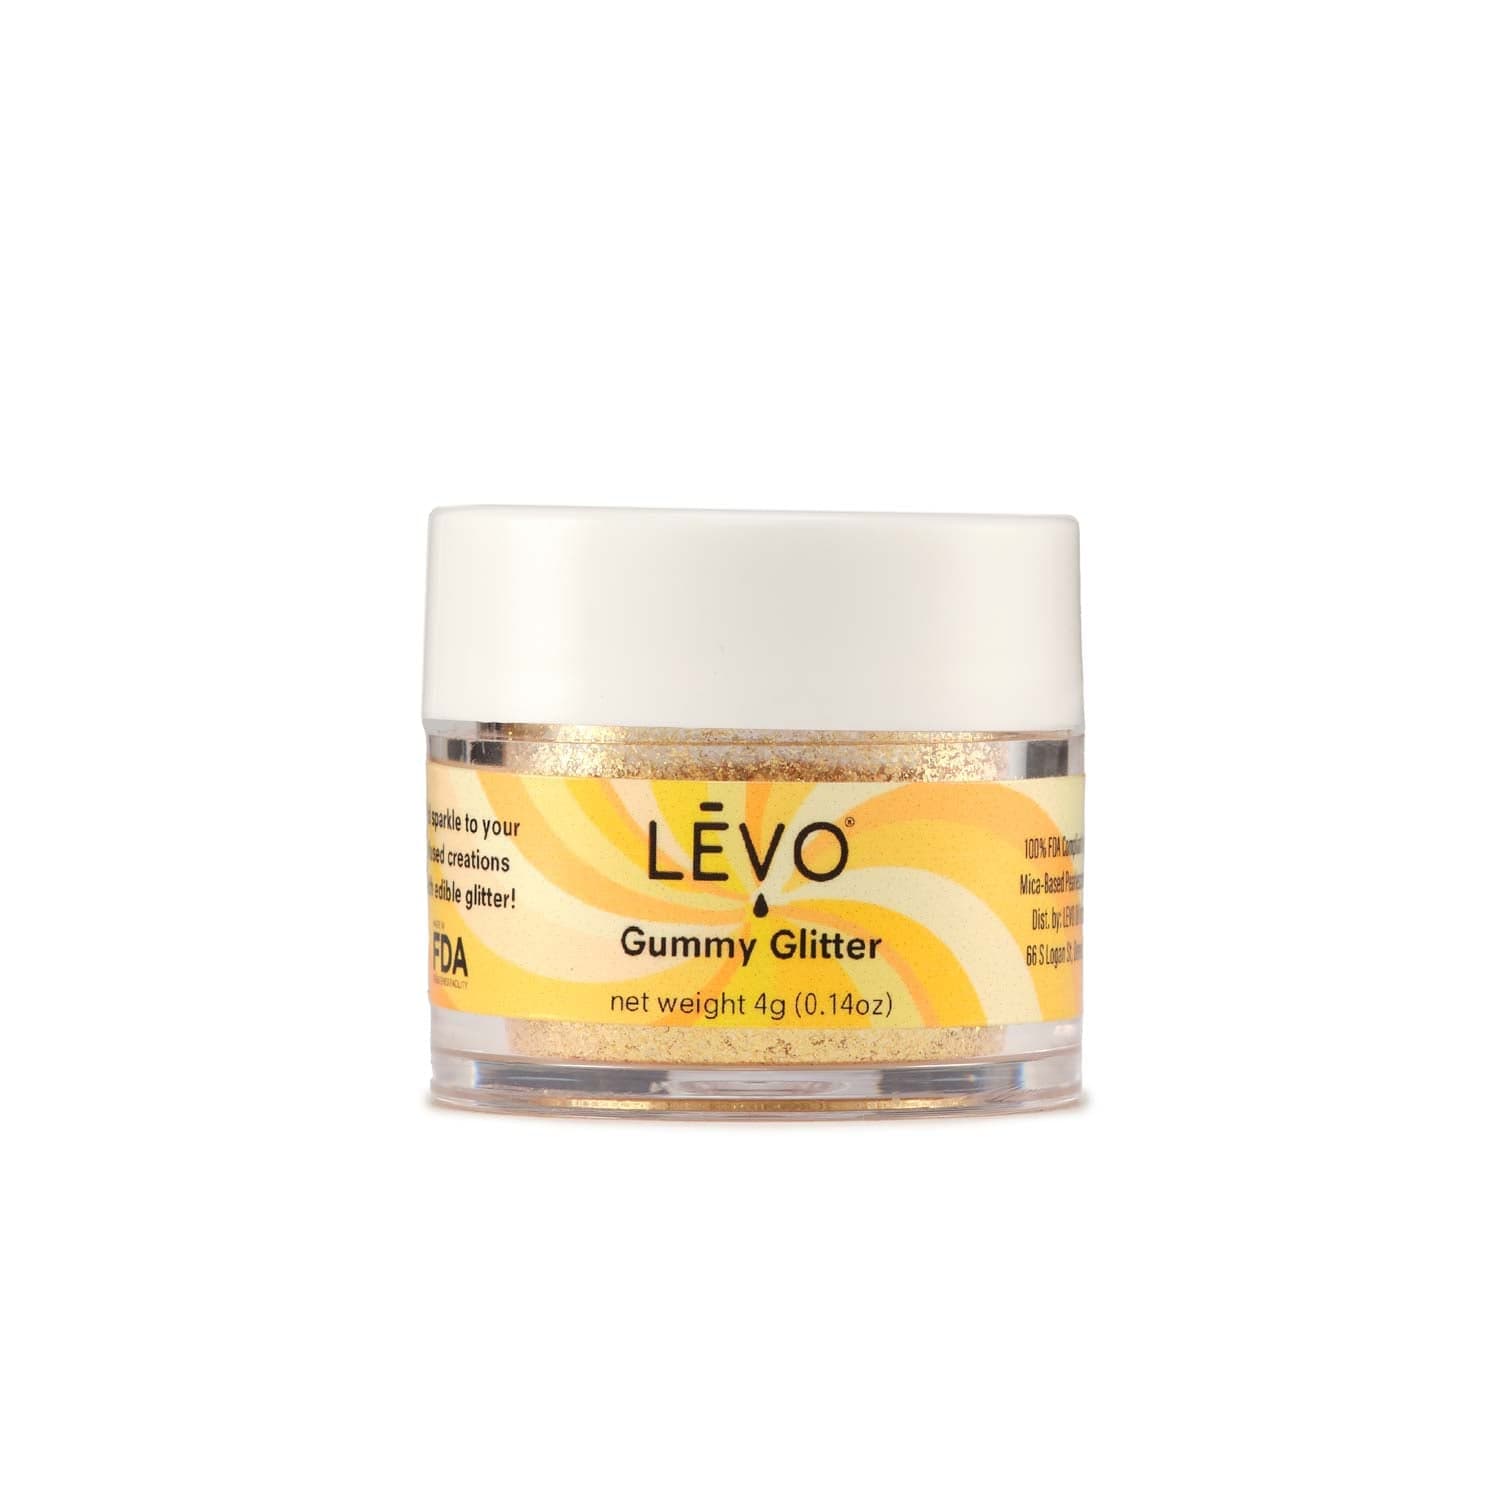 LEVO gummy glitter in gold. Discover a world of flavor and sparkle with the Gummy Decorating Kit's Edible Glitter, Shimmer, and Sour Sugars.